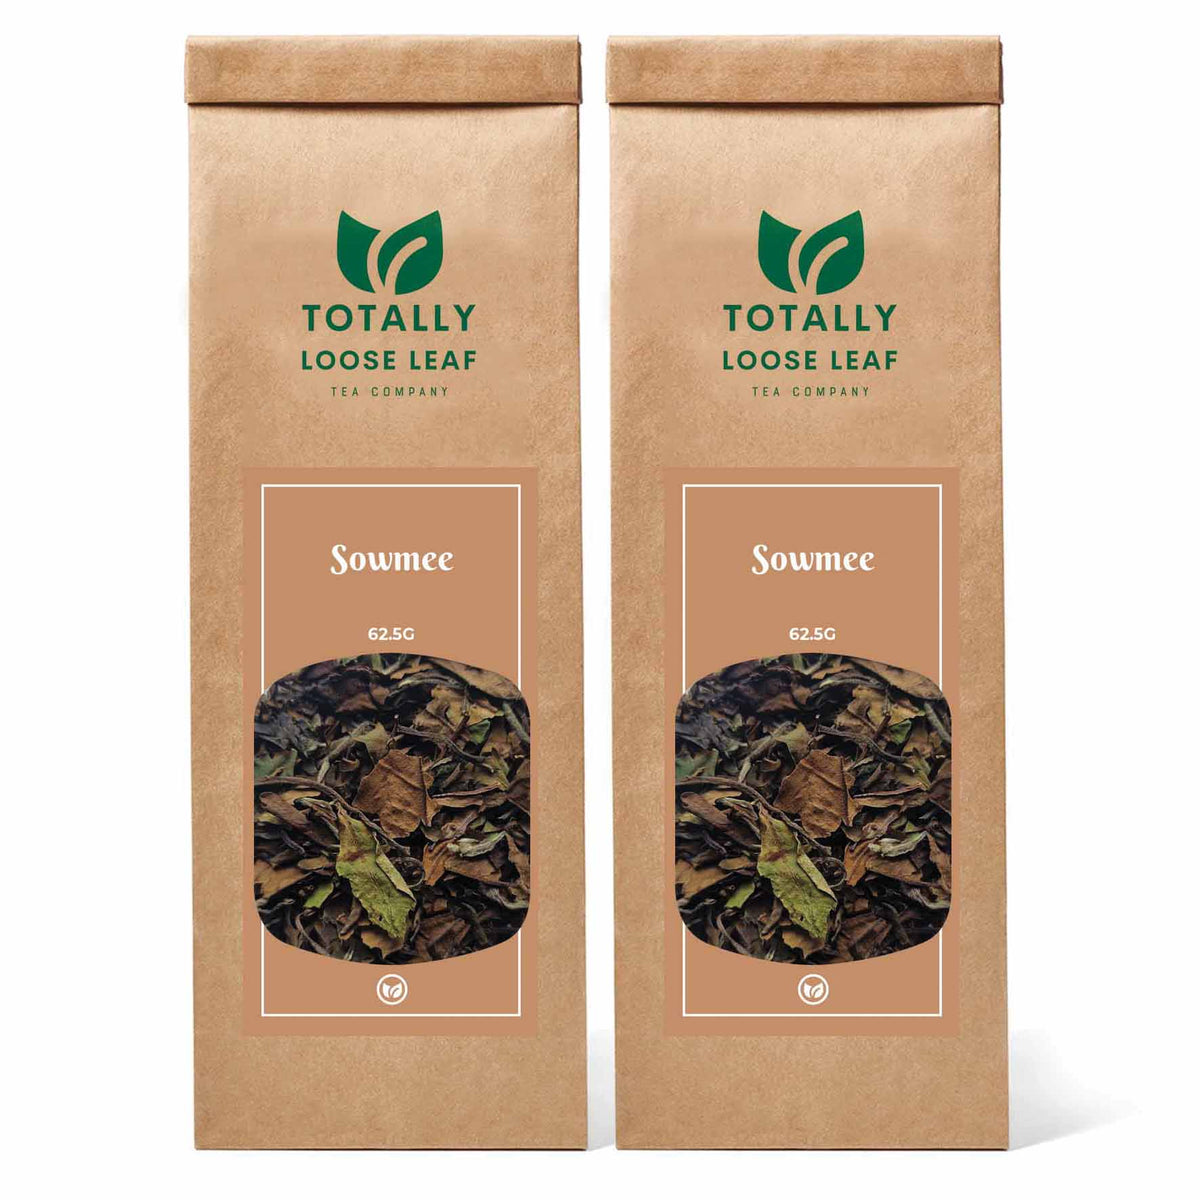 Sowmee White Loose Leaf Tea - two pouches